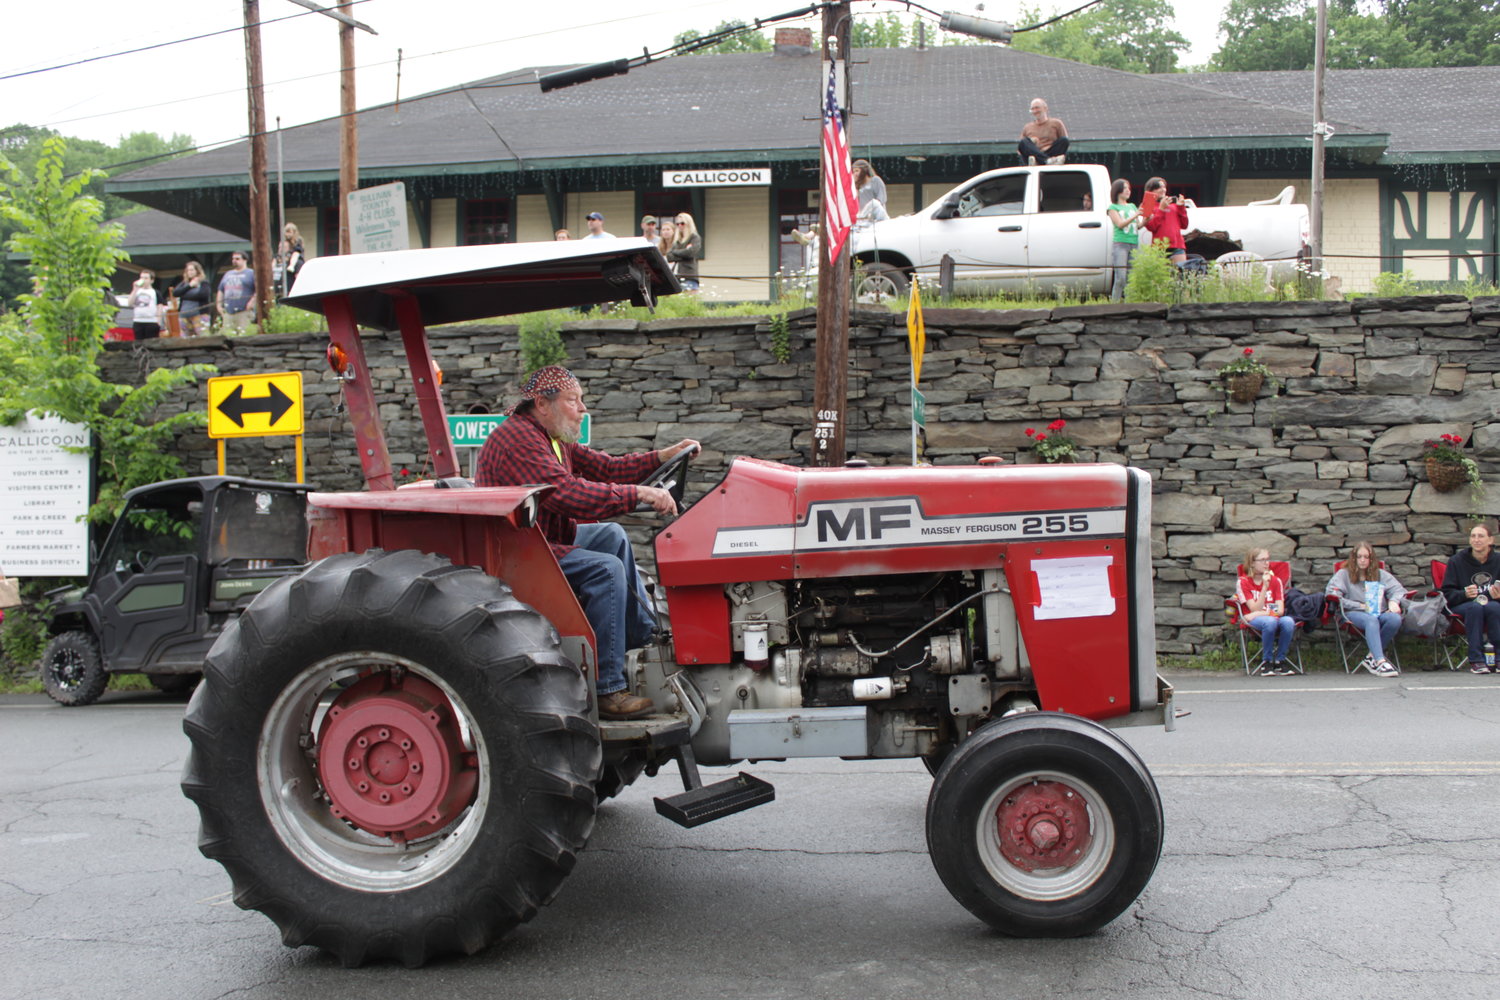 A Massey-Ferguson rumbles down Lower Main Street at the 2021 Callicoon Tractor Parade.